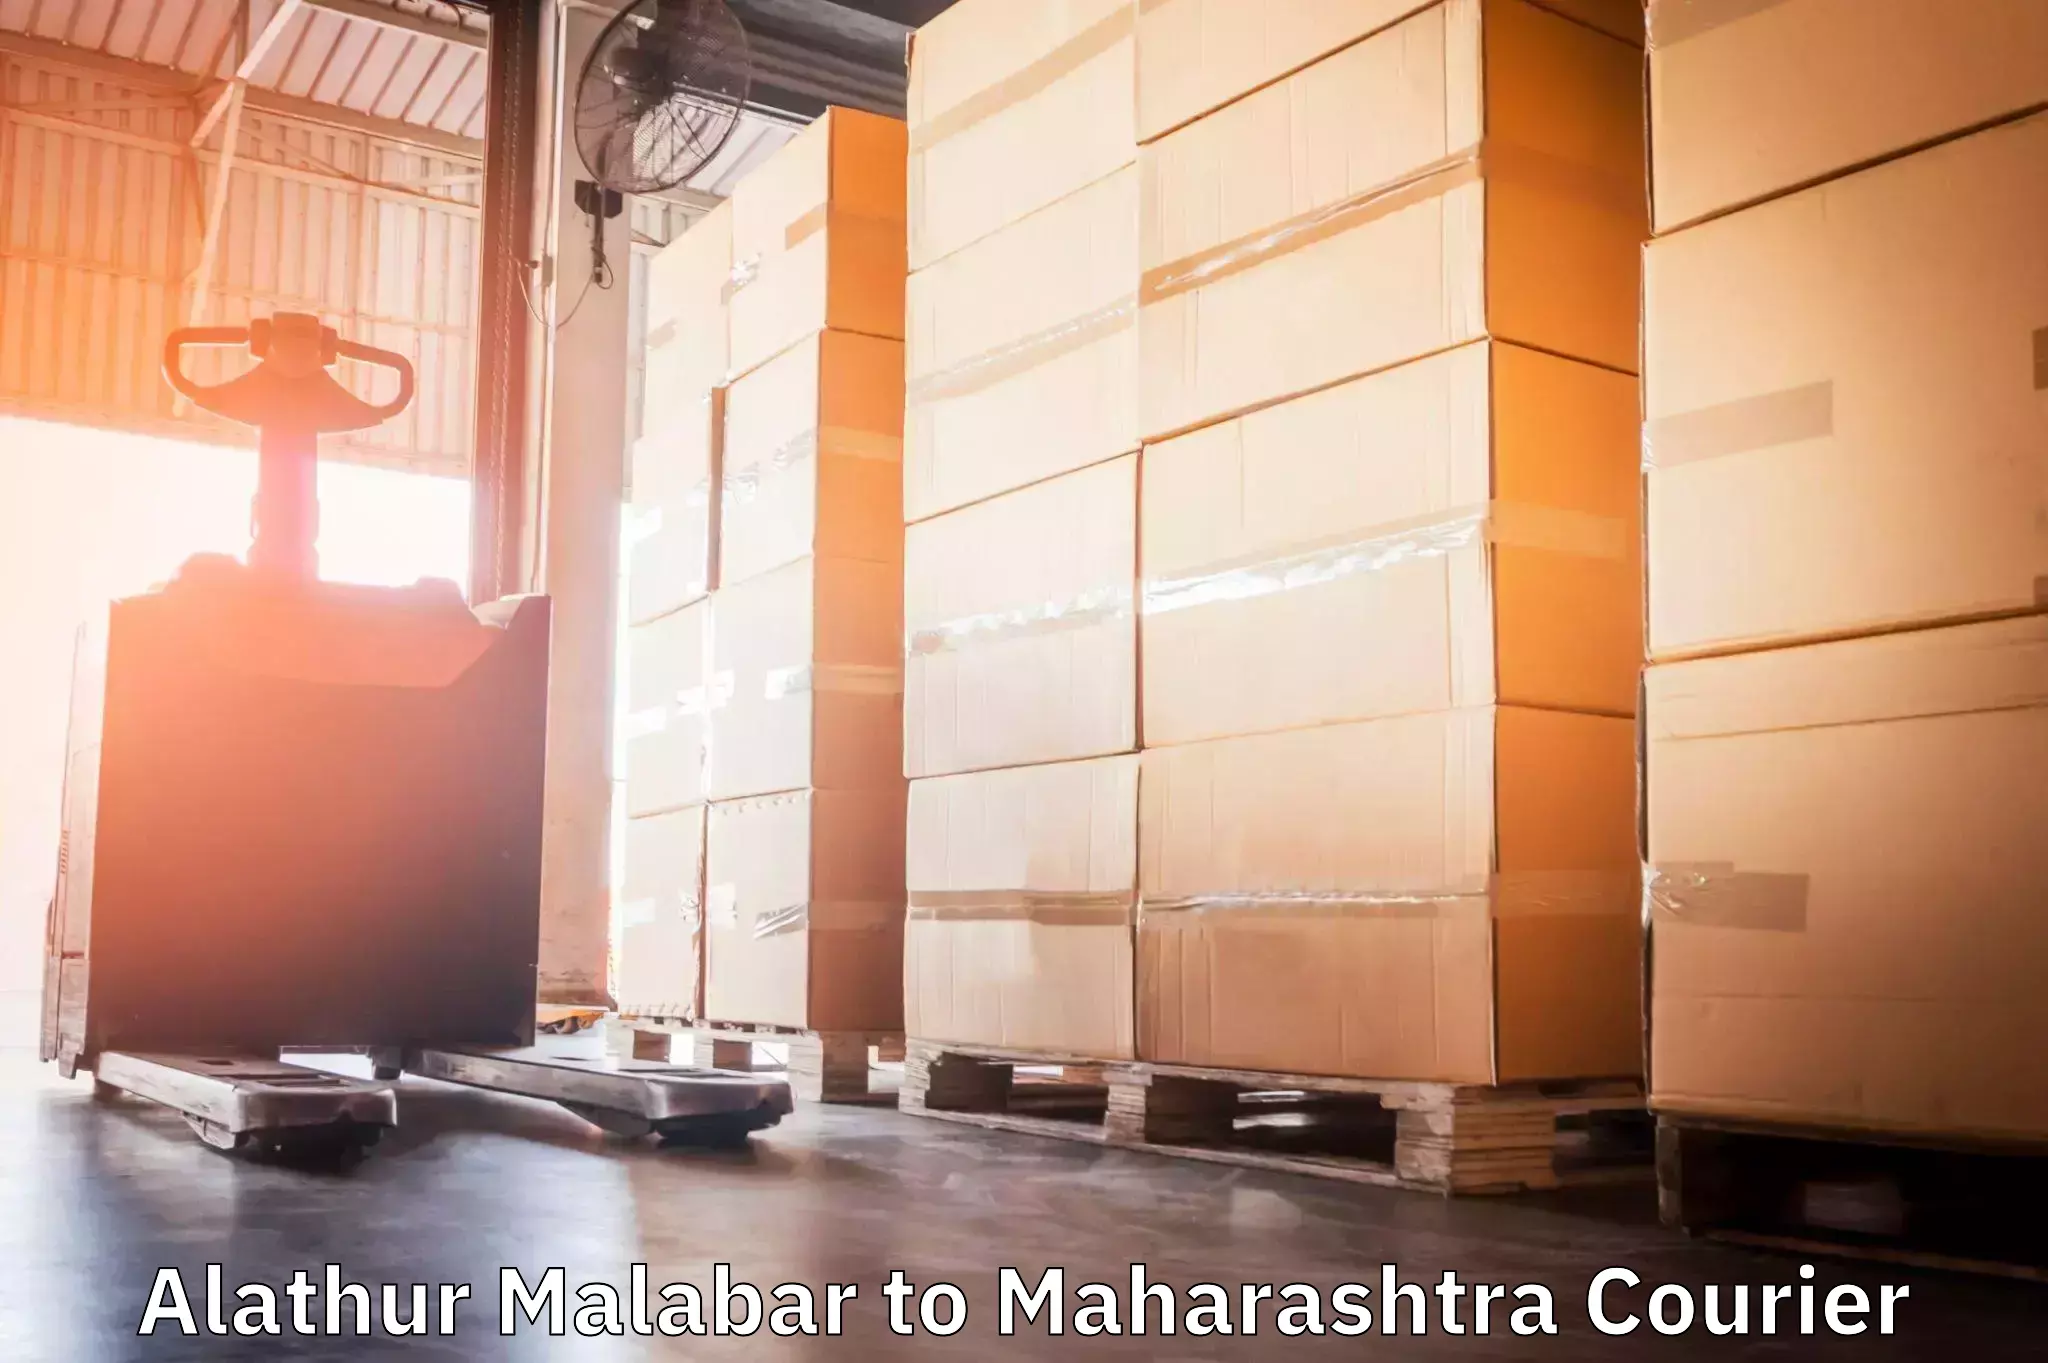 Reliable freight solutions in Alathur Malabar to Maharashtra